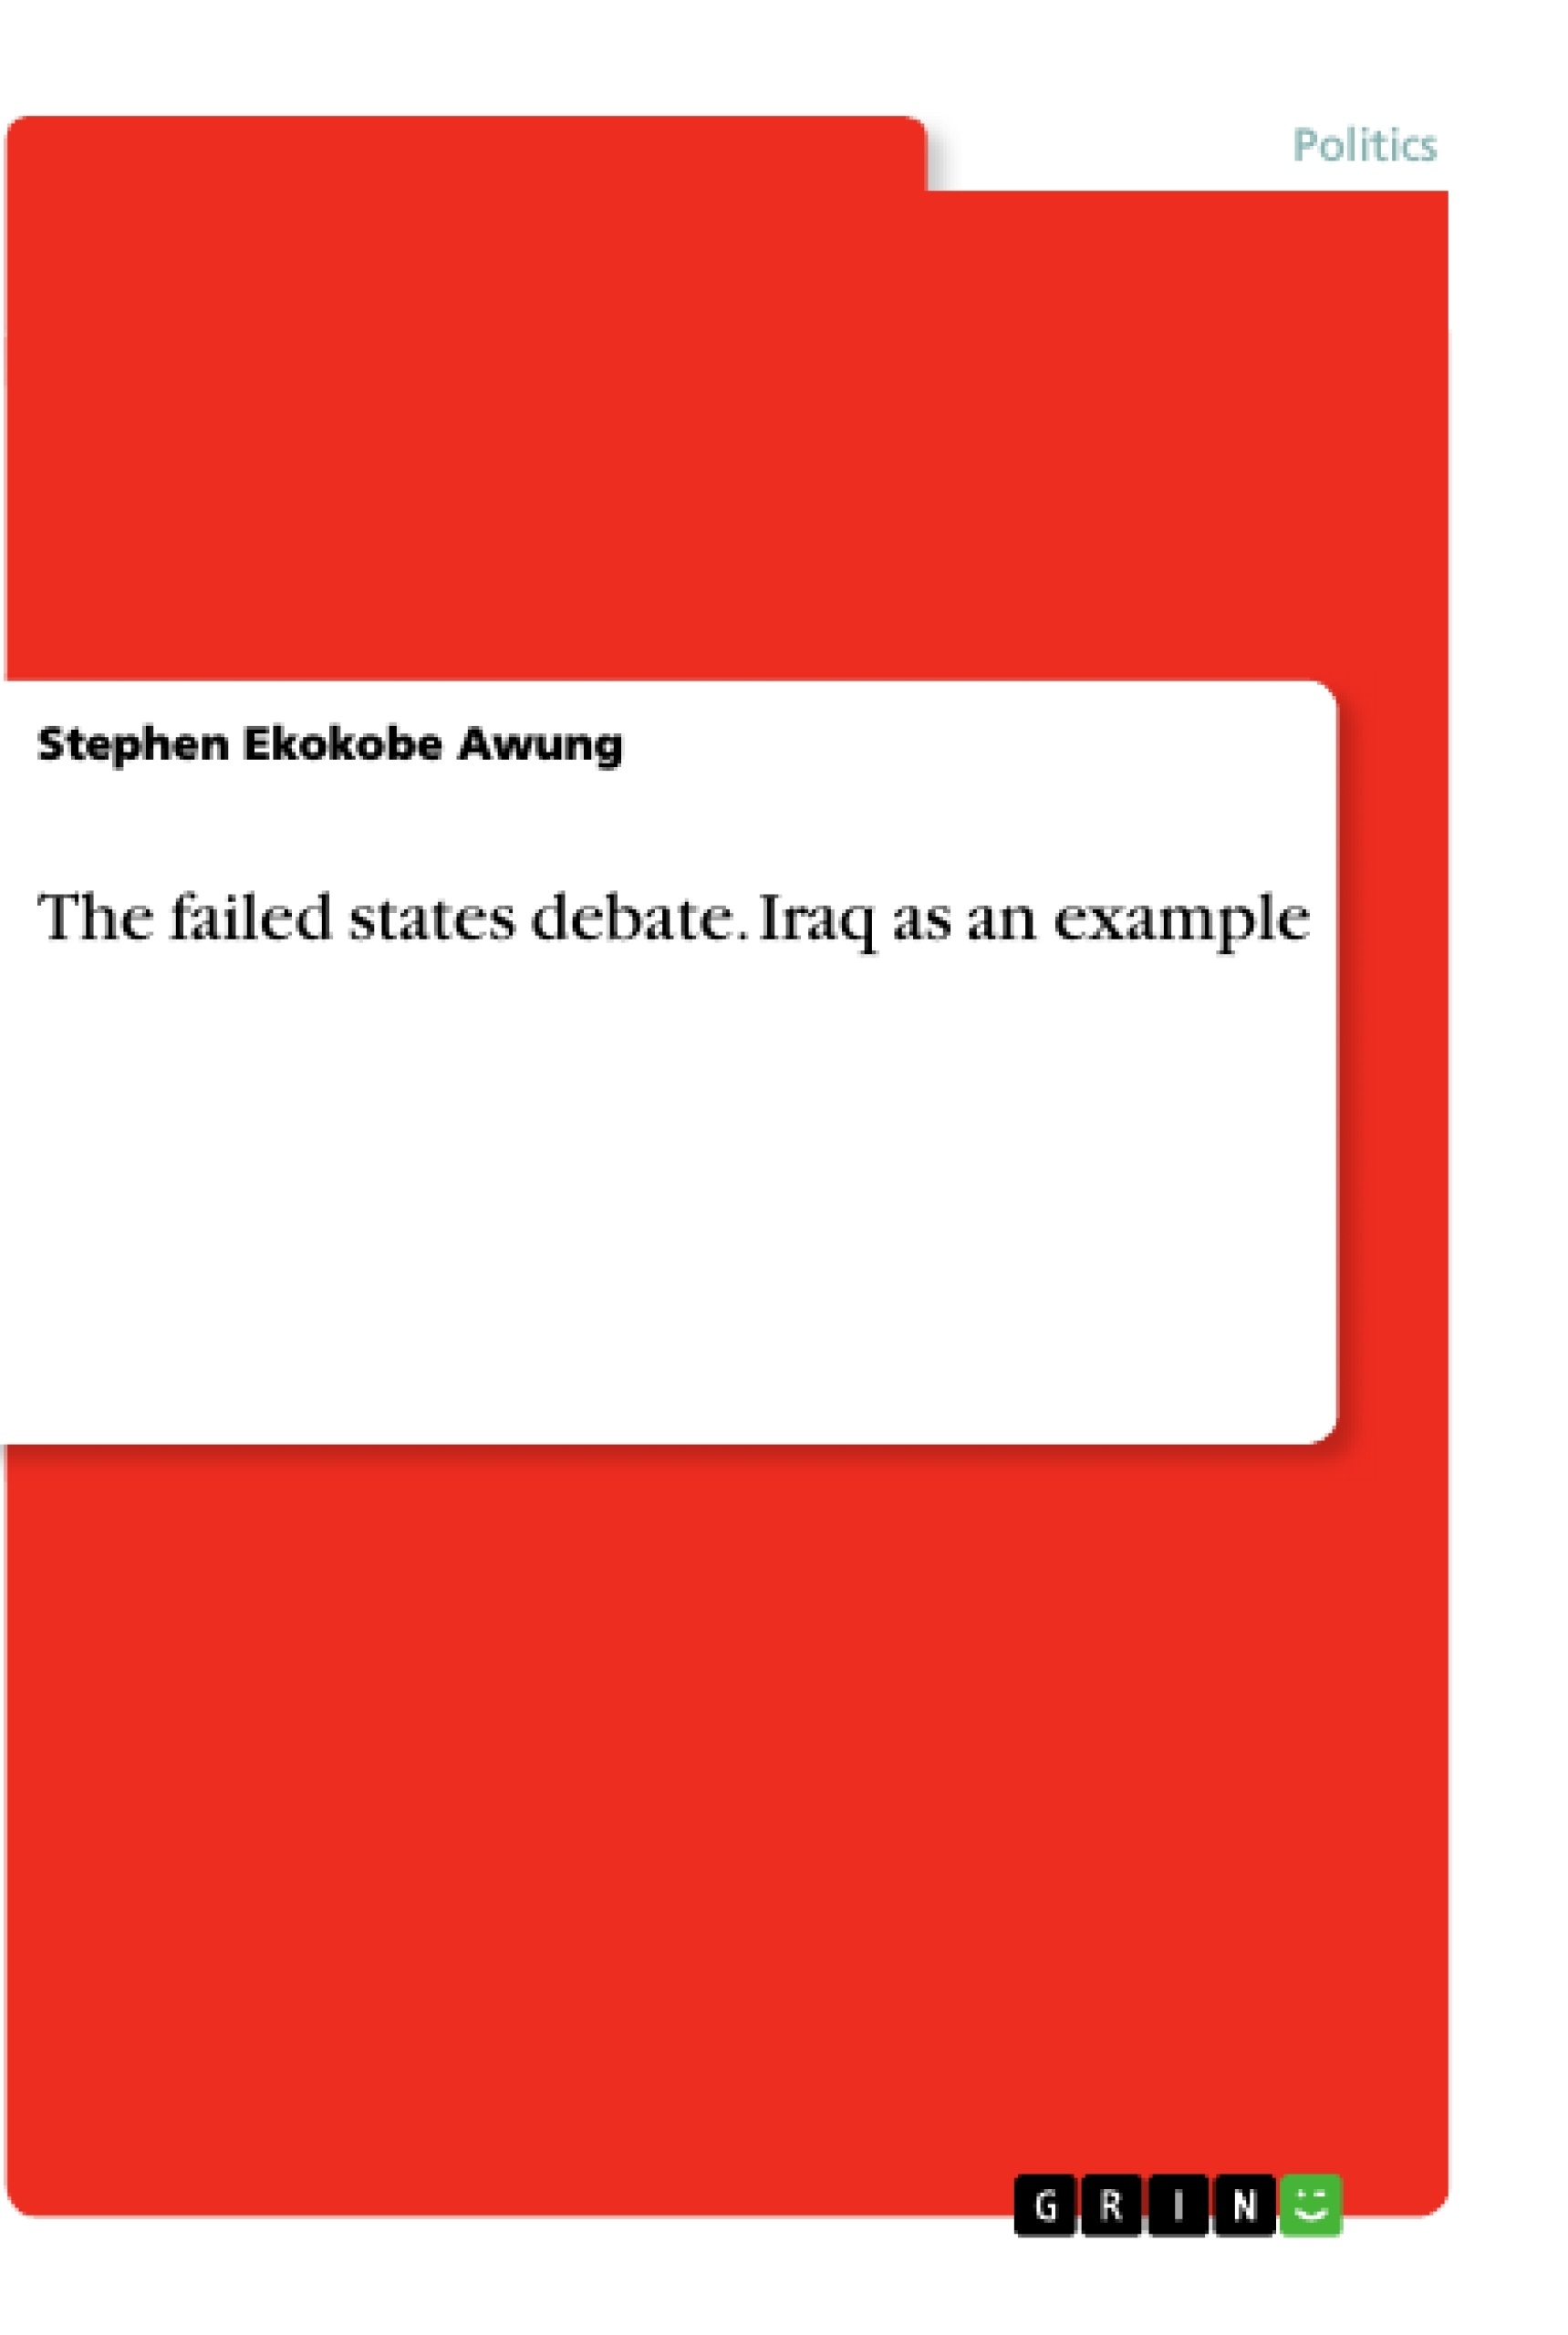 Título: The failed states debate. Iraq as an example